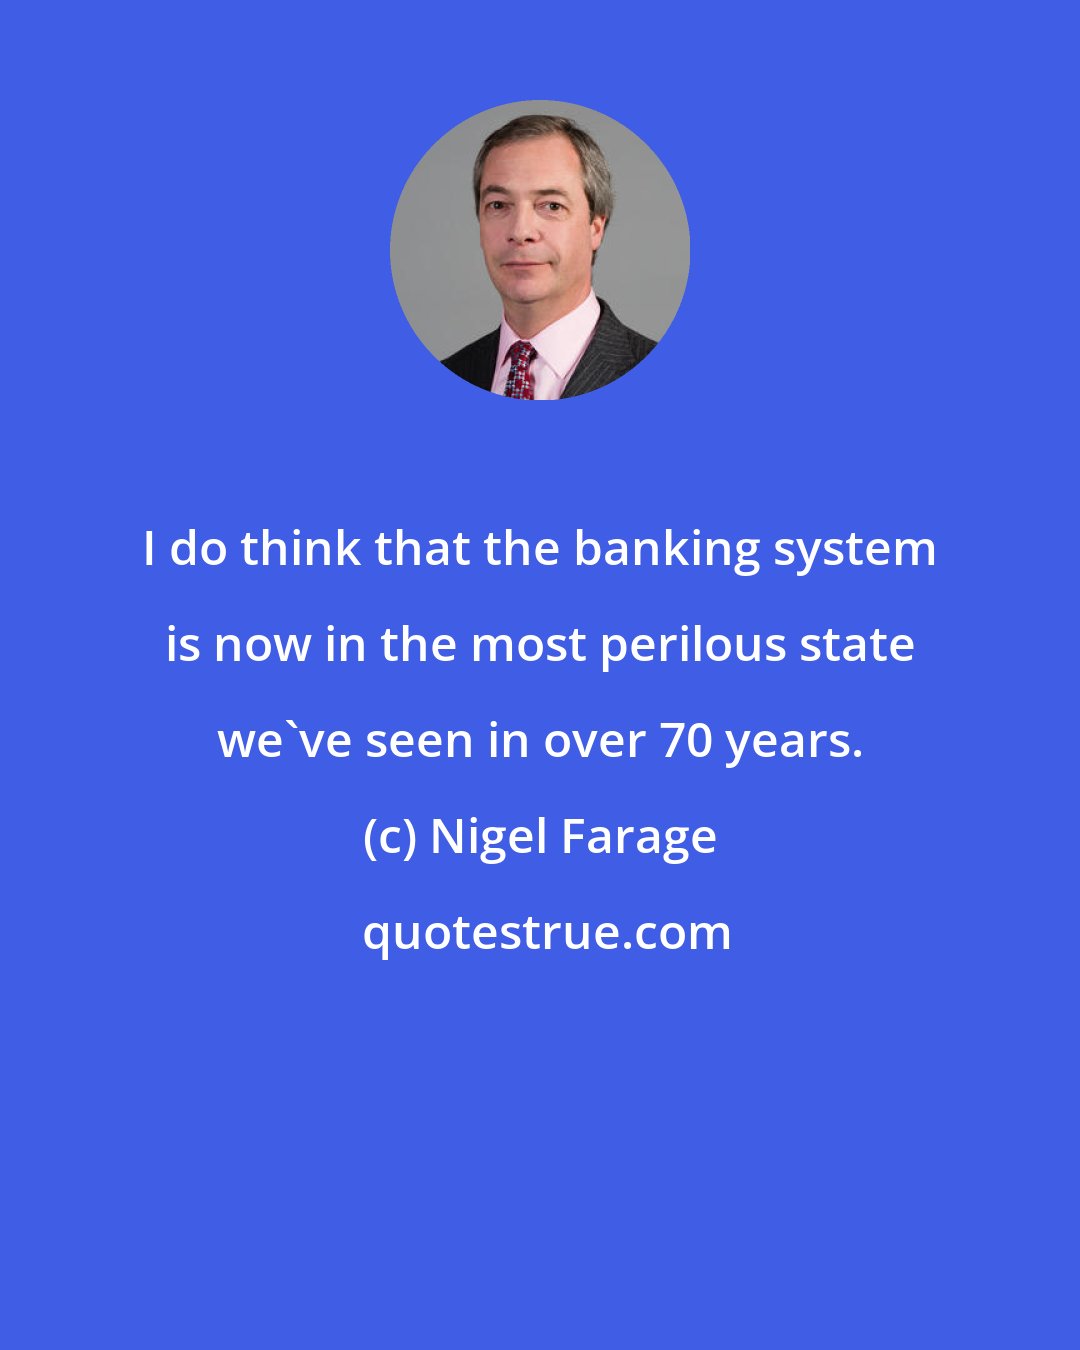 Nigel Farage: I do think that the banking system is now in the most perilous state we've seen in over 70 years.